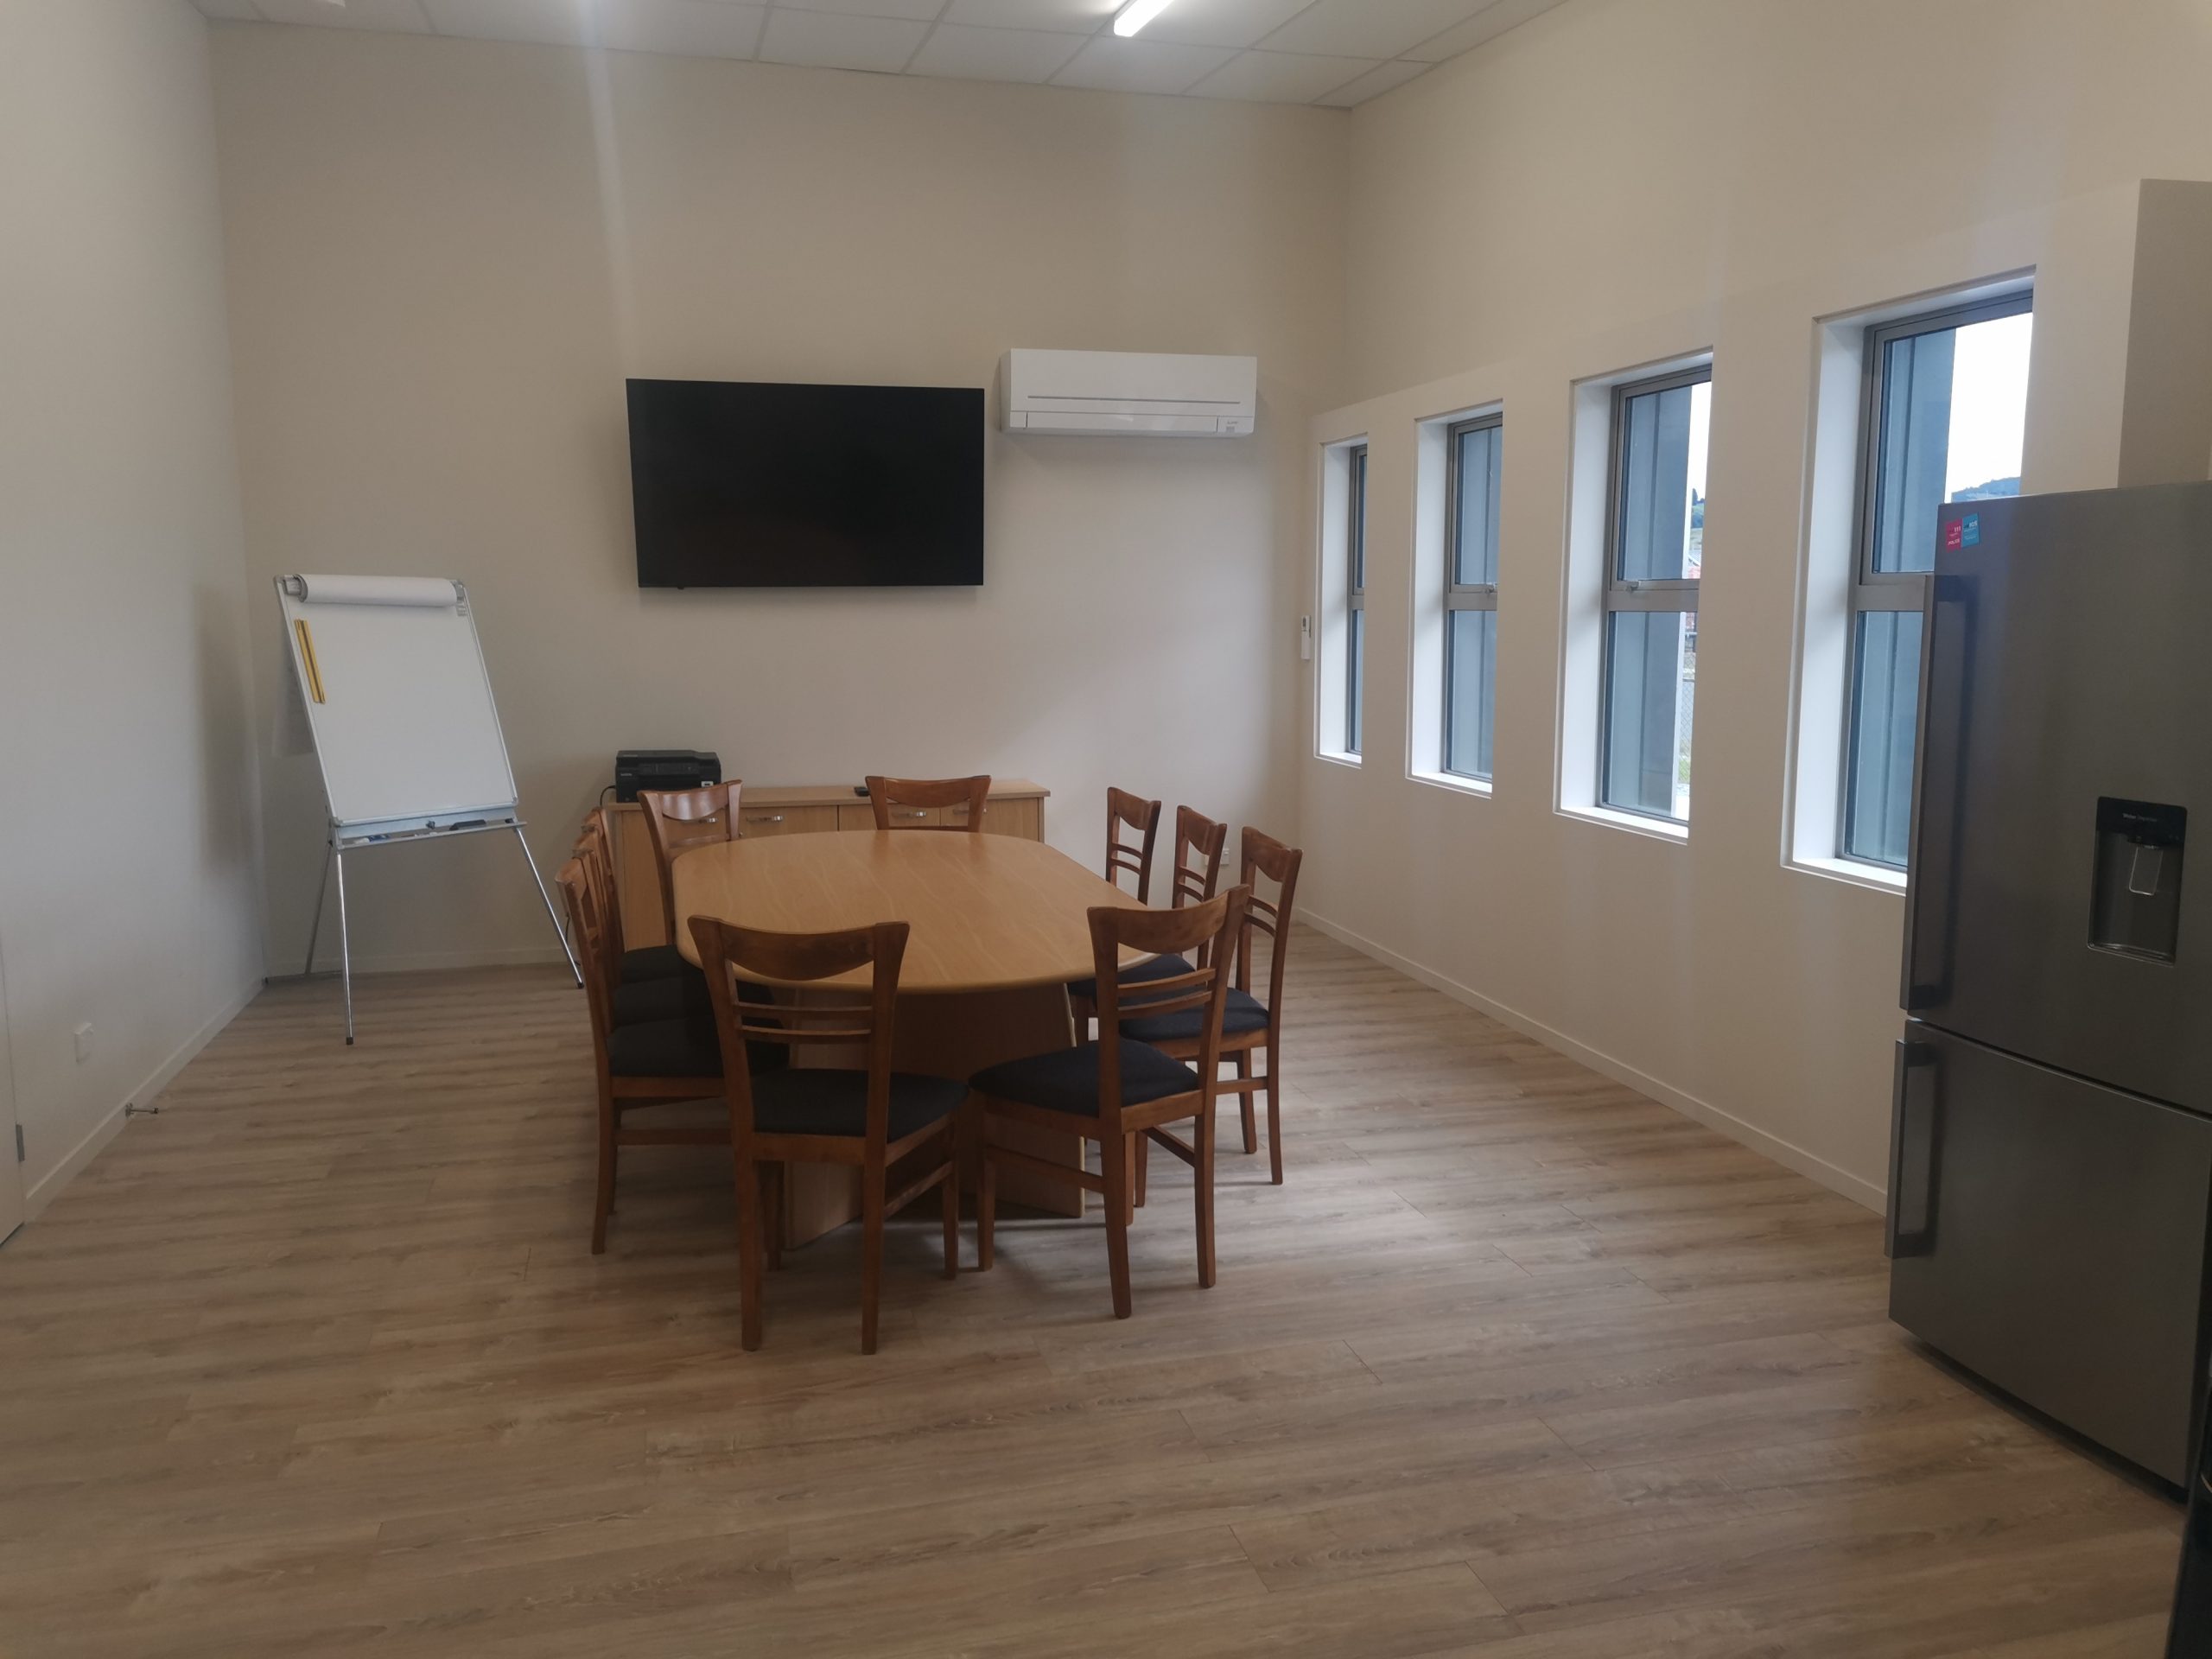 Meeting room for hire